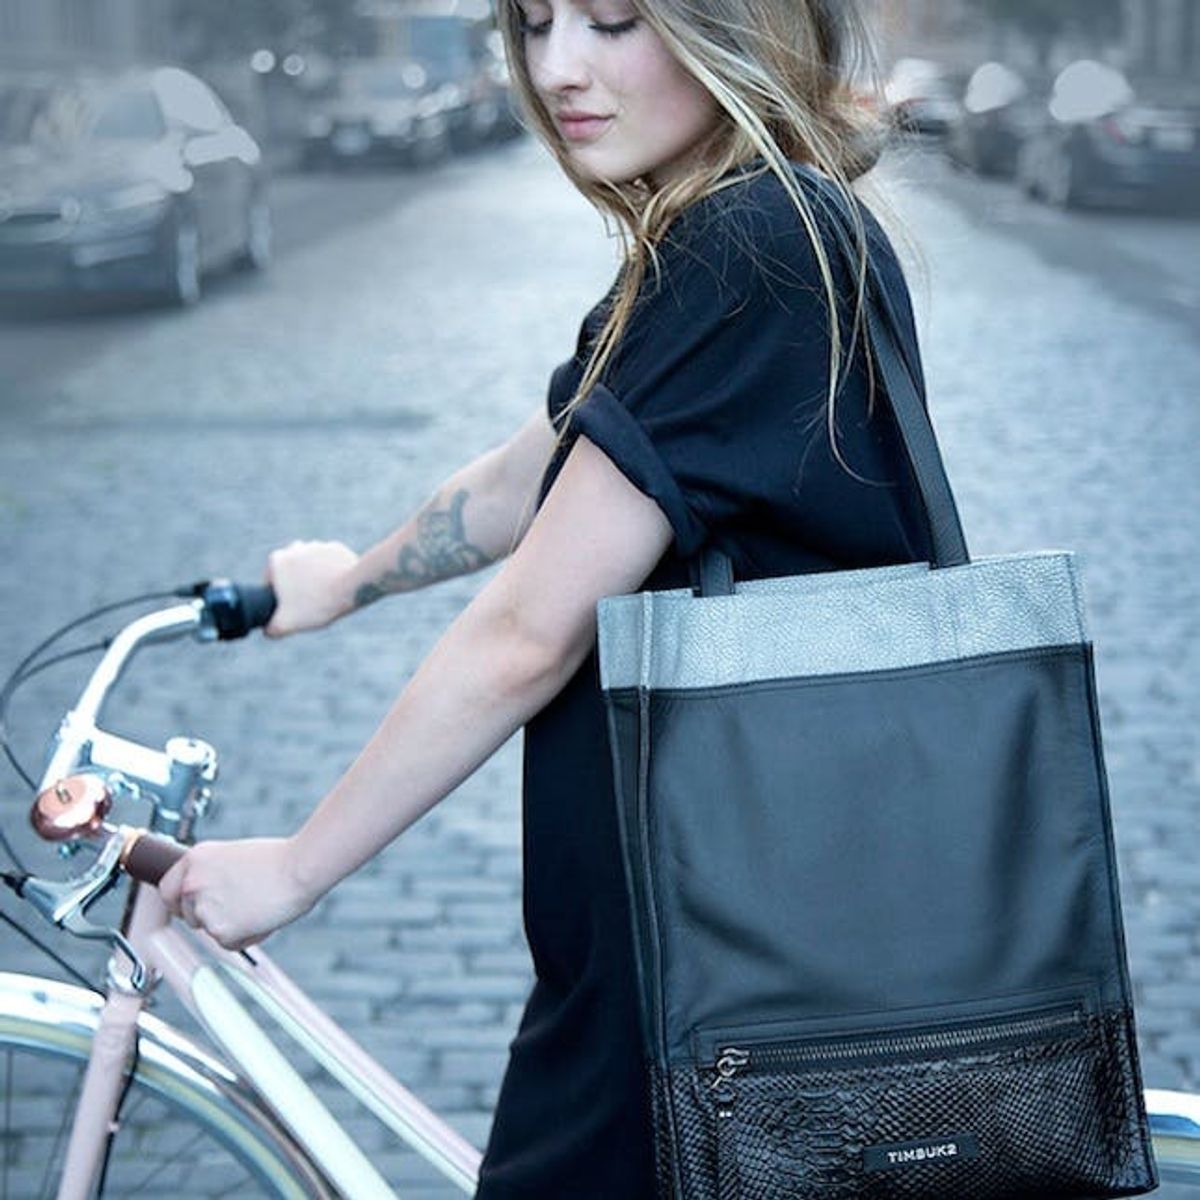 You’ll Want These New Bike Bags Even If You Don’t Bike